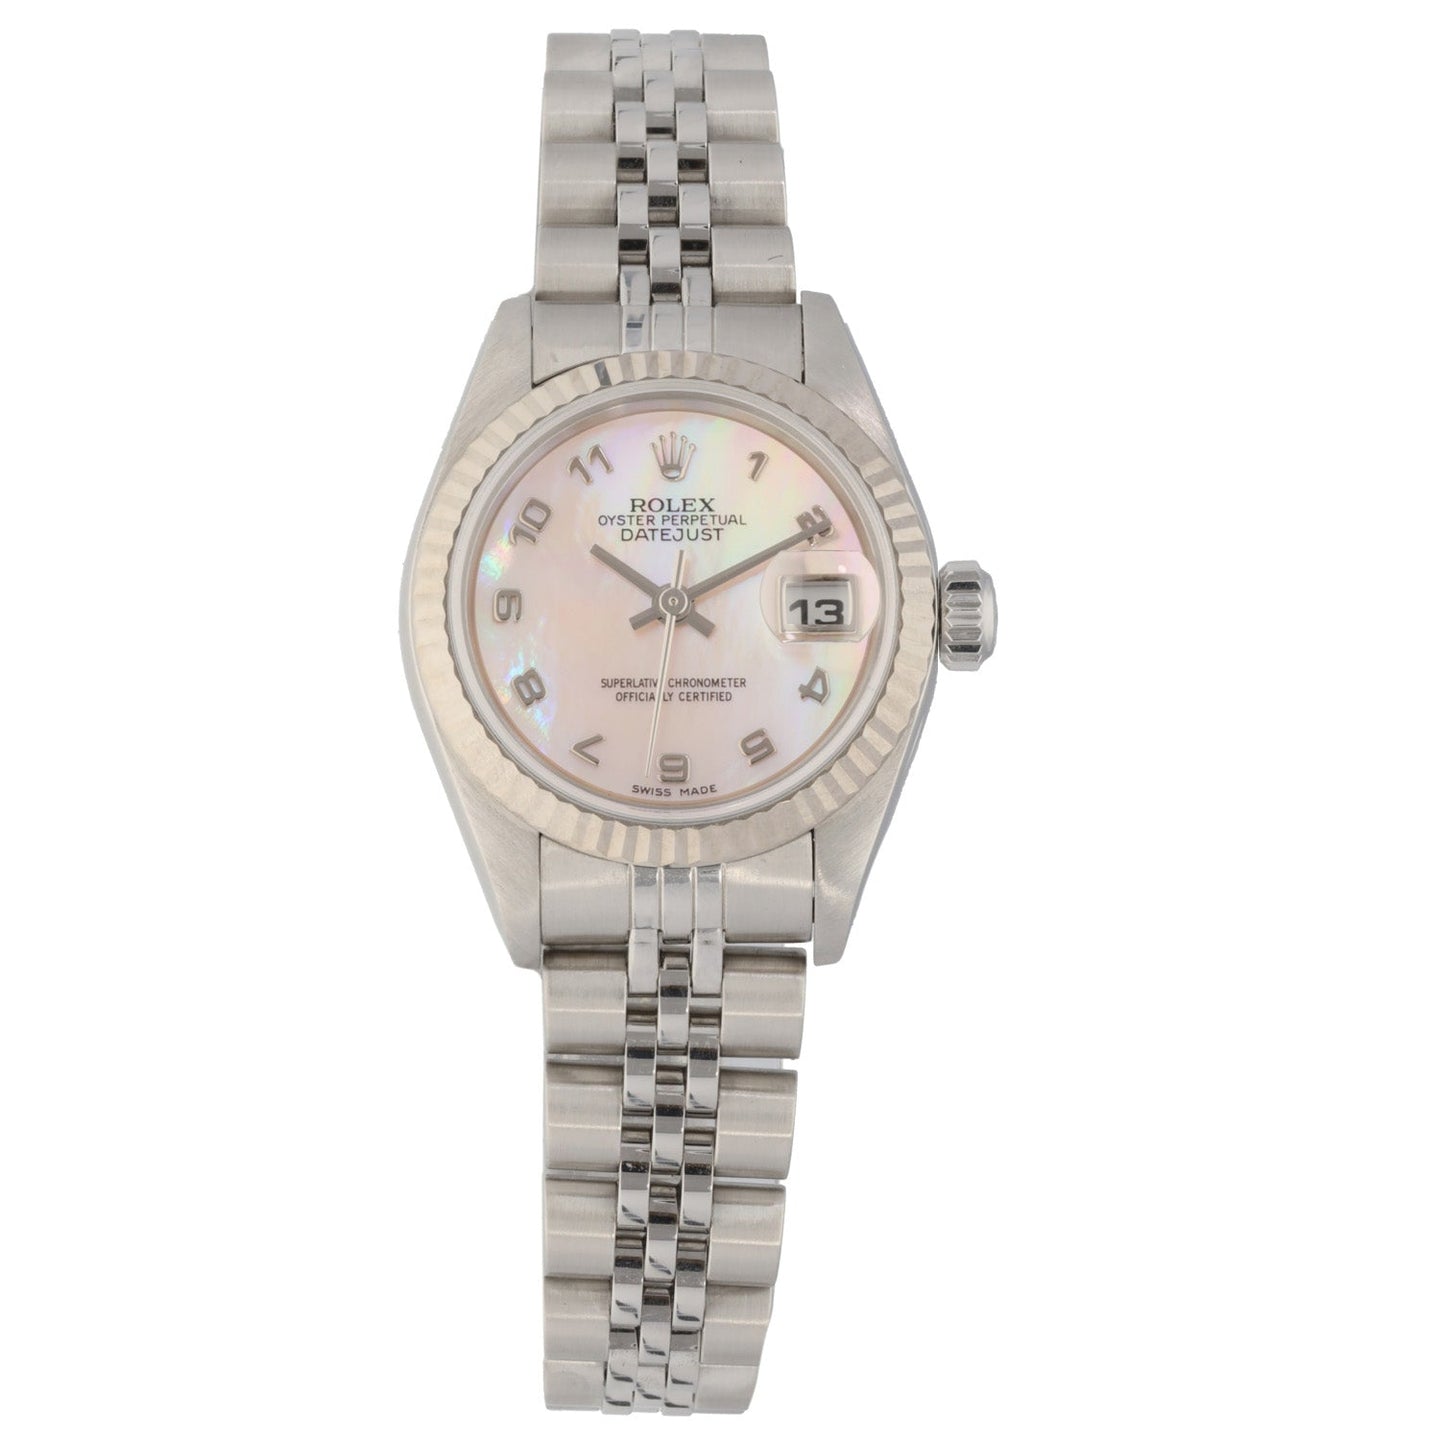 Rolex Lady Datejust 79174 26mm Stainless Steel Watch